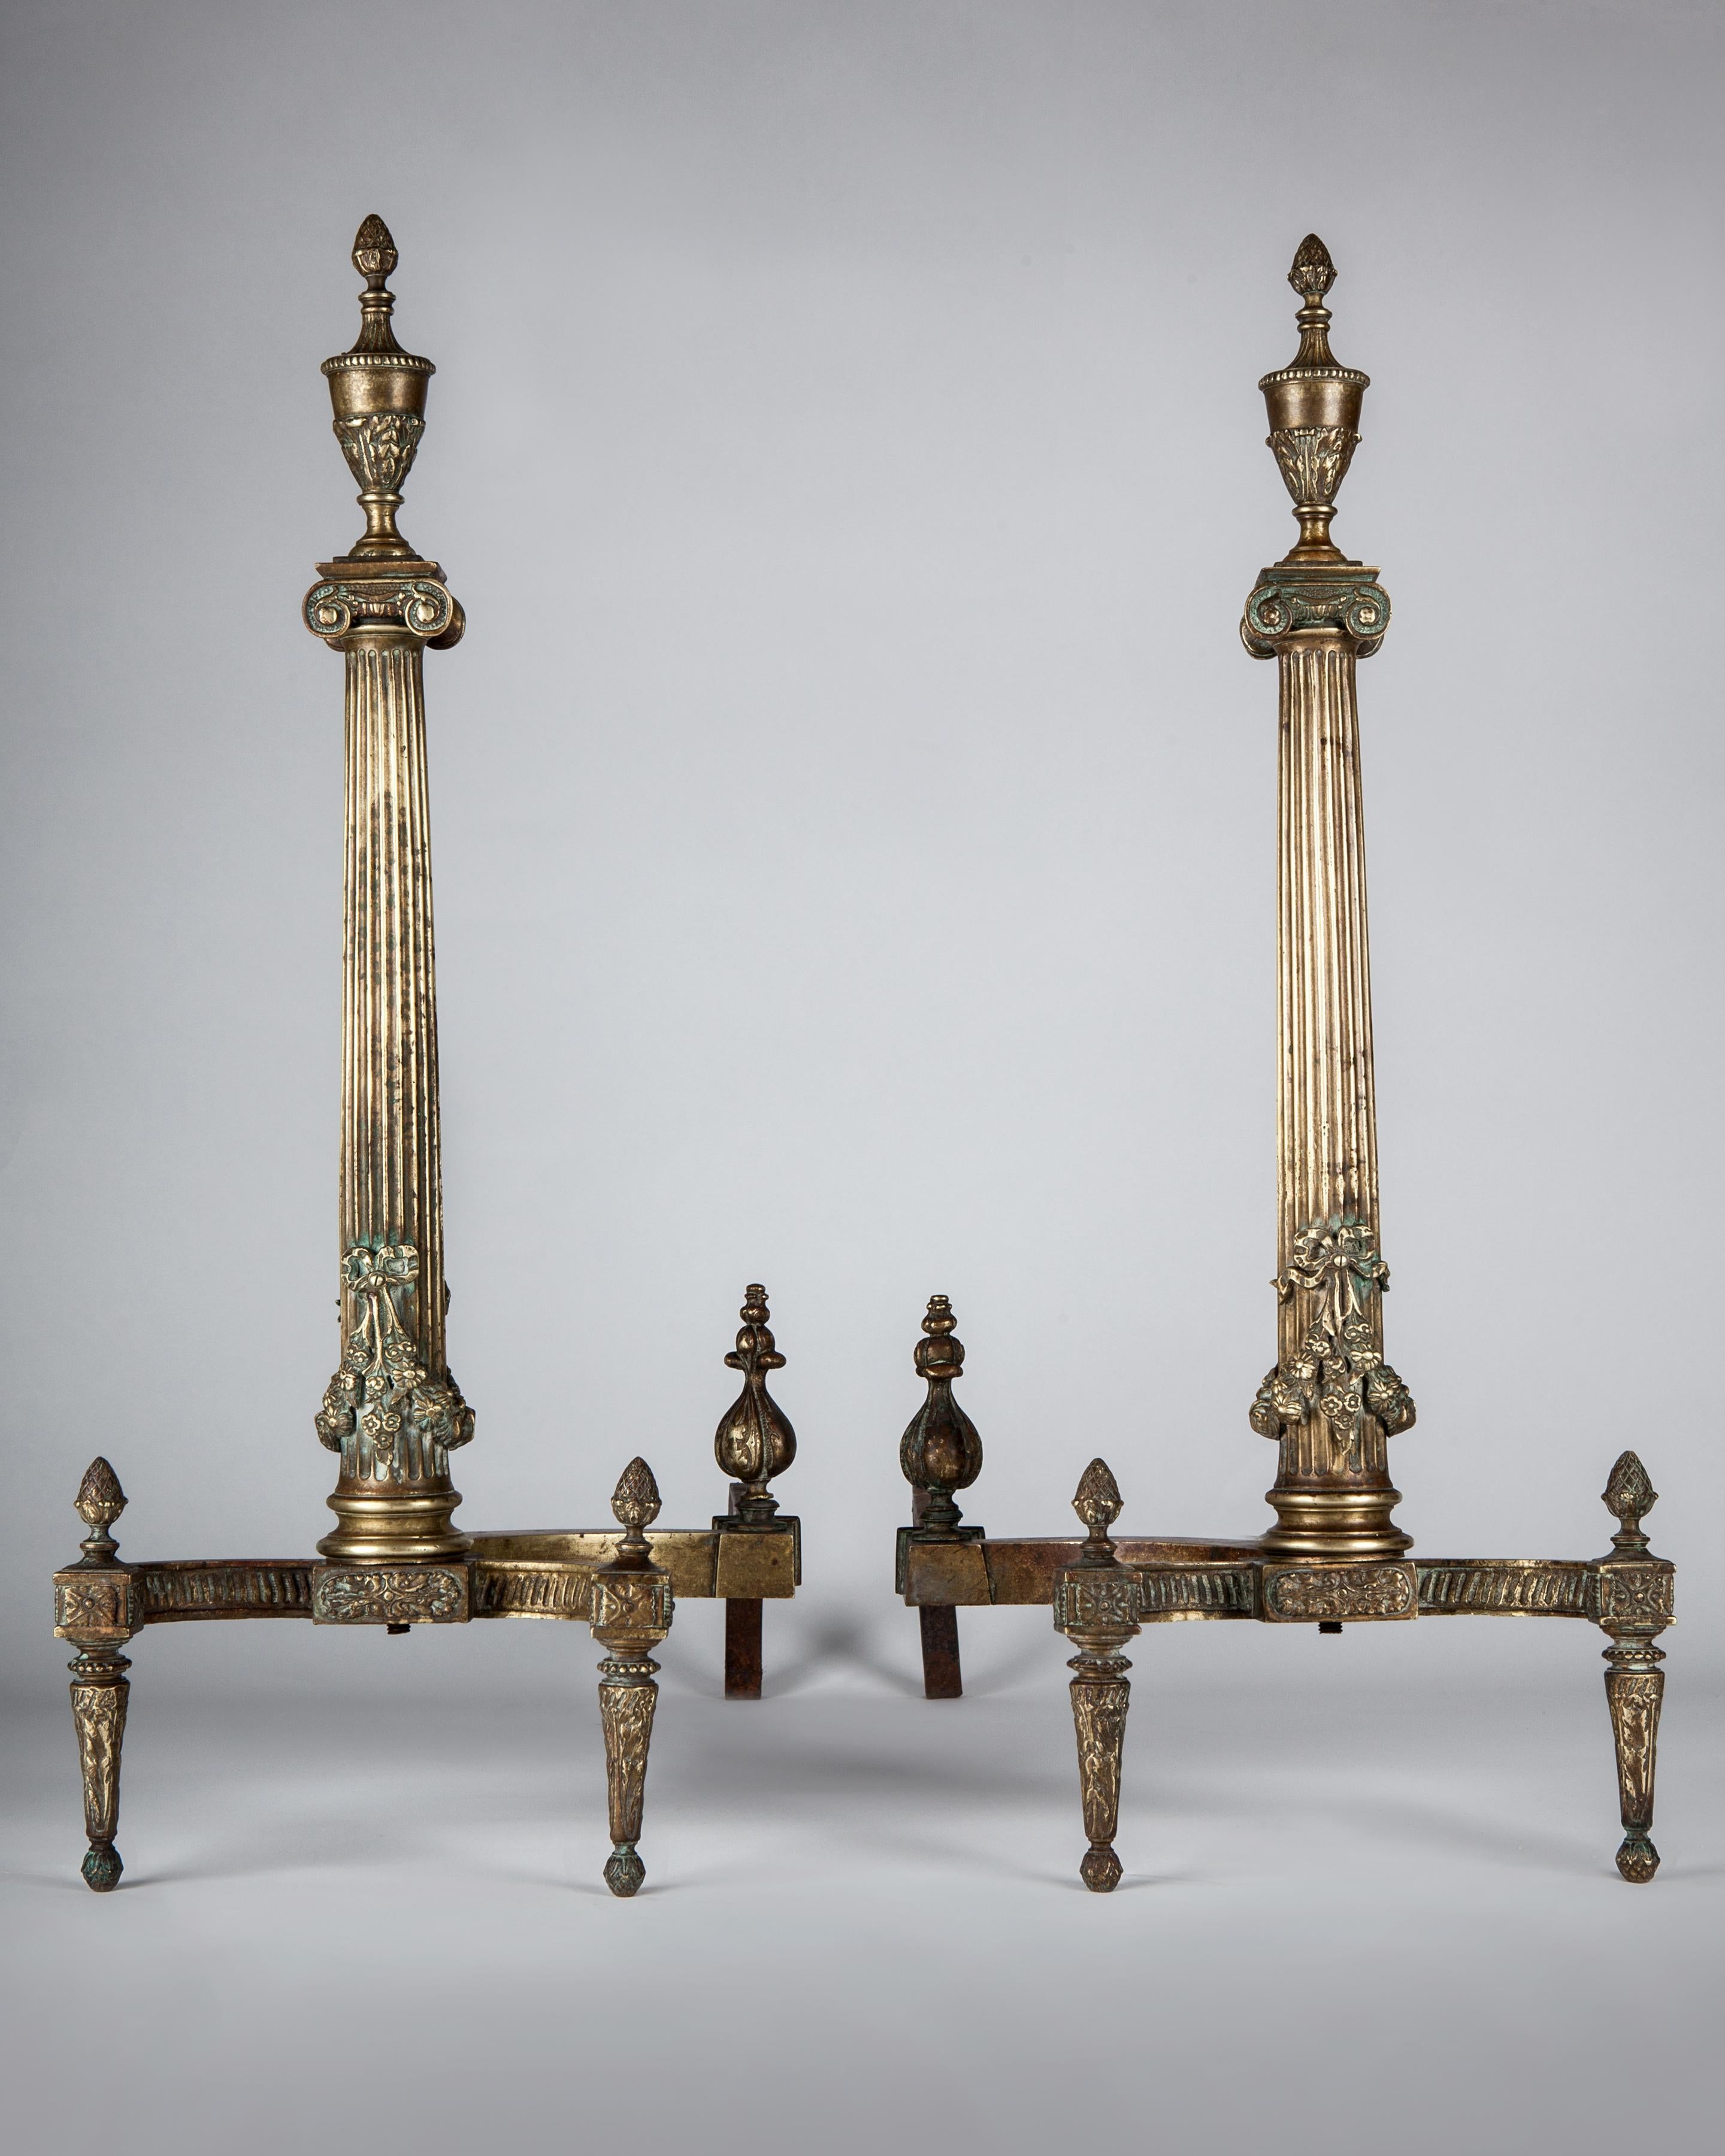 AFP0584
A pair of antique cast brass andirons having fluted tapered columns mounted with floral swags and ionic capitals, surmounted by urn finials. The column shafts rest on an inward curving set of legs and wrought iron supports clad in brass are